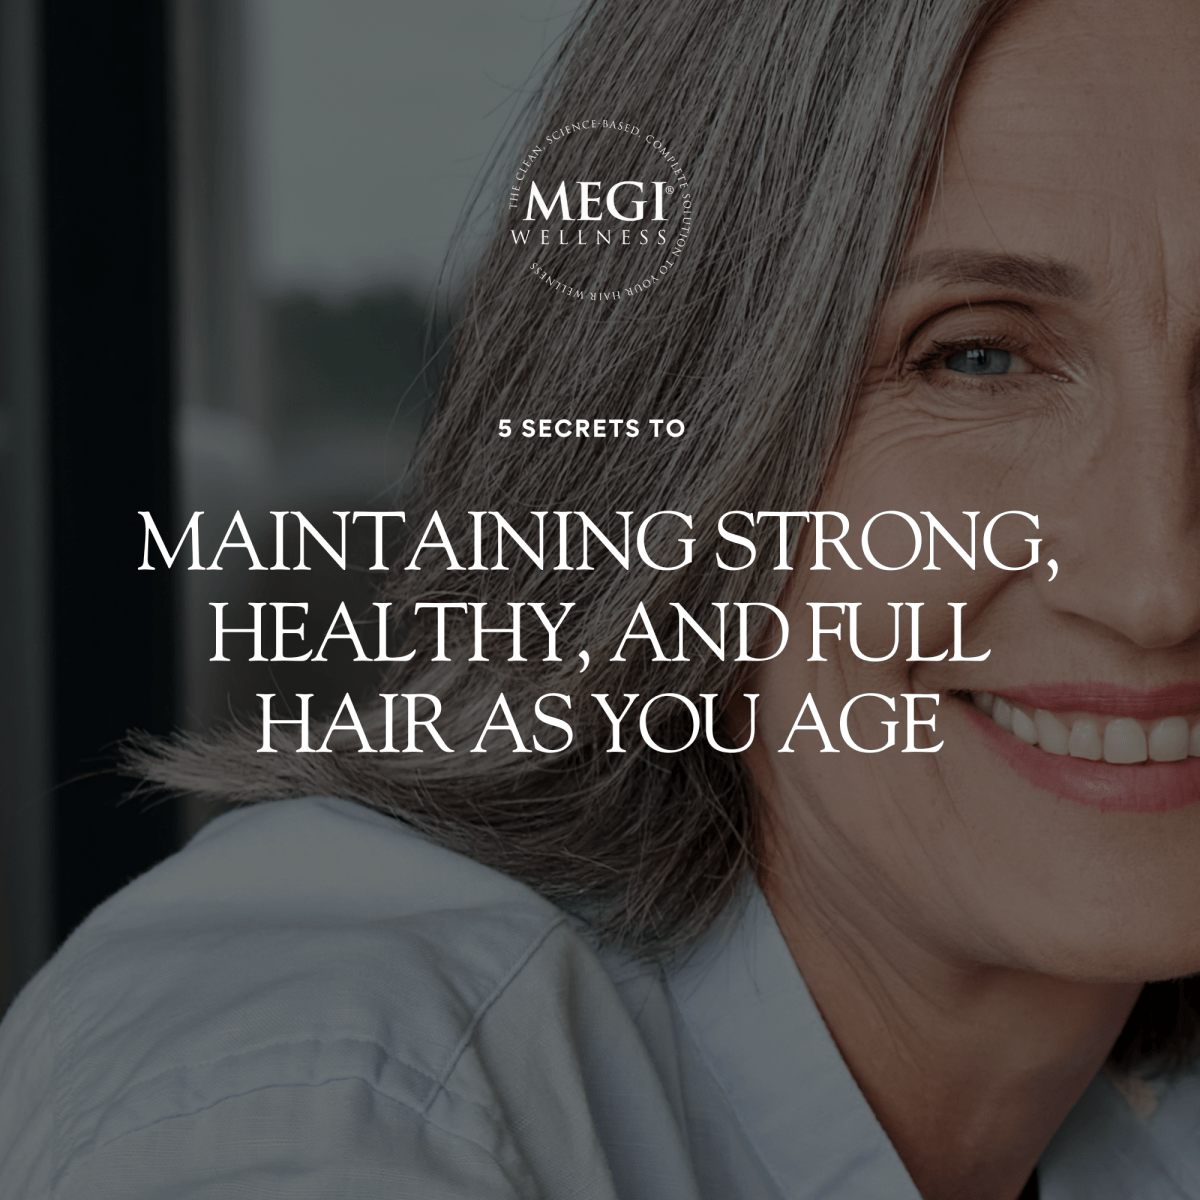 5 Secrets to Maintaining Strong, Healthy, and Full Hair as You Age - MEGIWellness